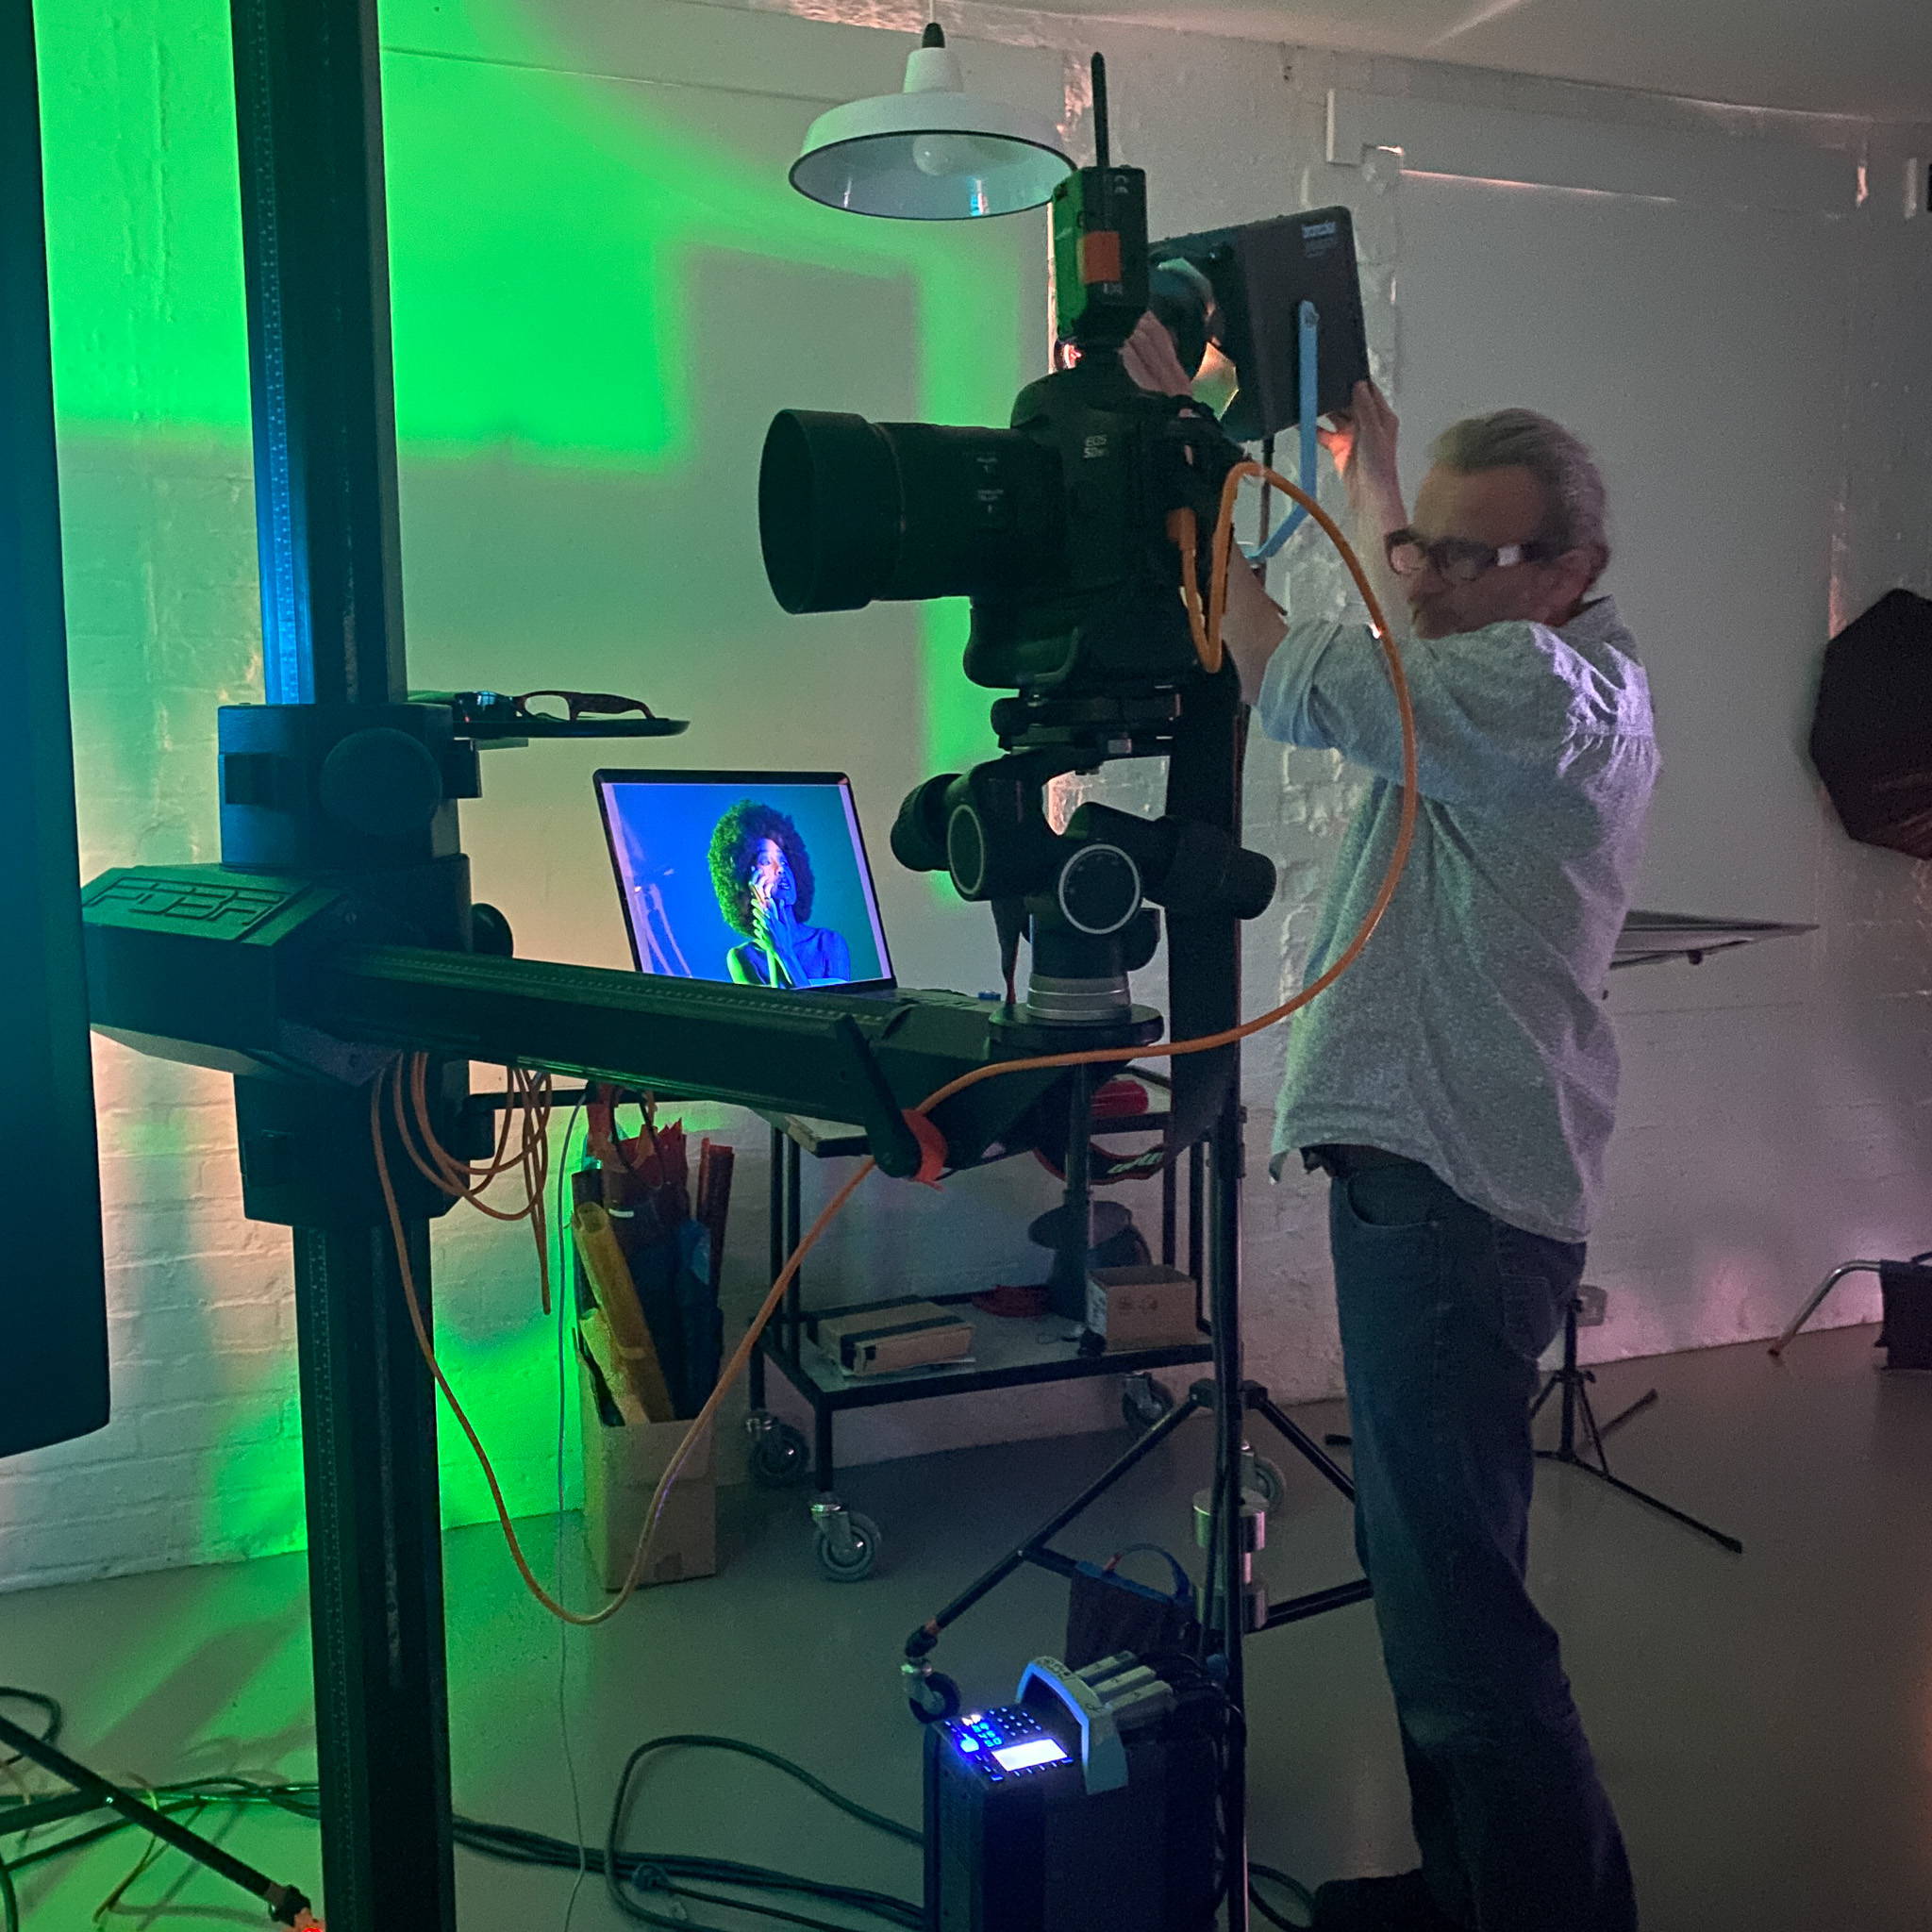 Photographer Carl wears a white shirt with blue jeans and thick black glasses, he is adjusting a piece of lighting equipment. In the foreground, a camera is mounted on a large gimbal that stands to the left. In the background, a laptop rests on a trolley a shows the close-up head-shot of a model bathed in green and blue lighting. 